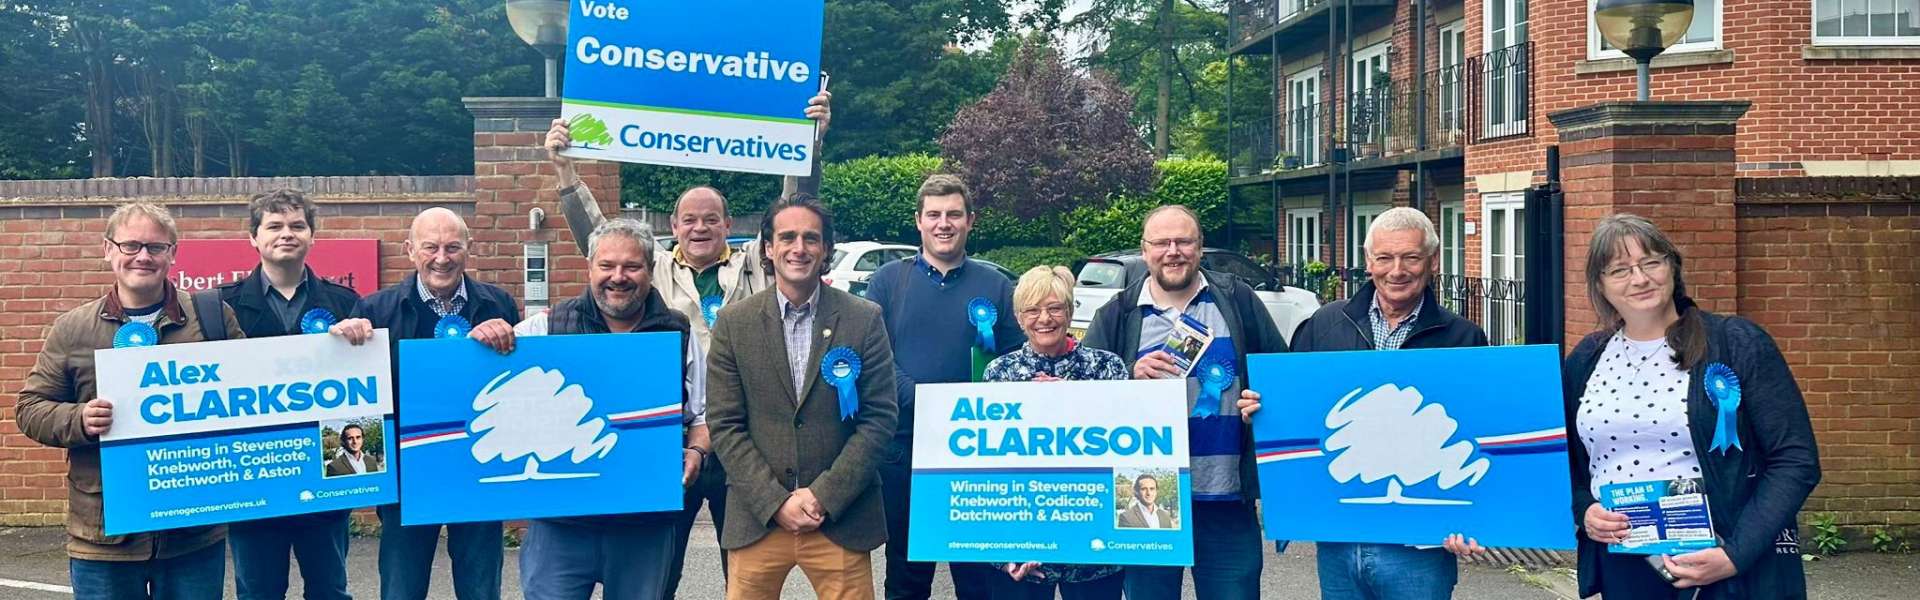 Alex Clarkson with campaign activists in Knebworth 